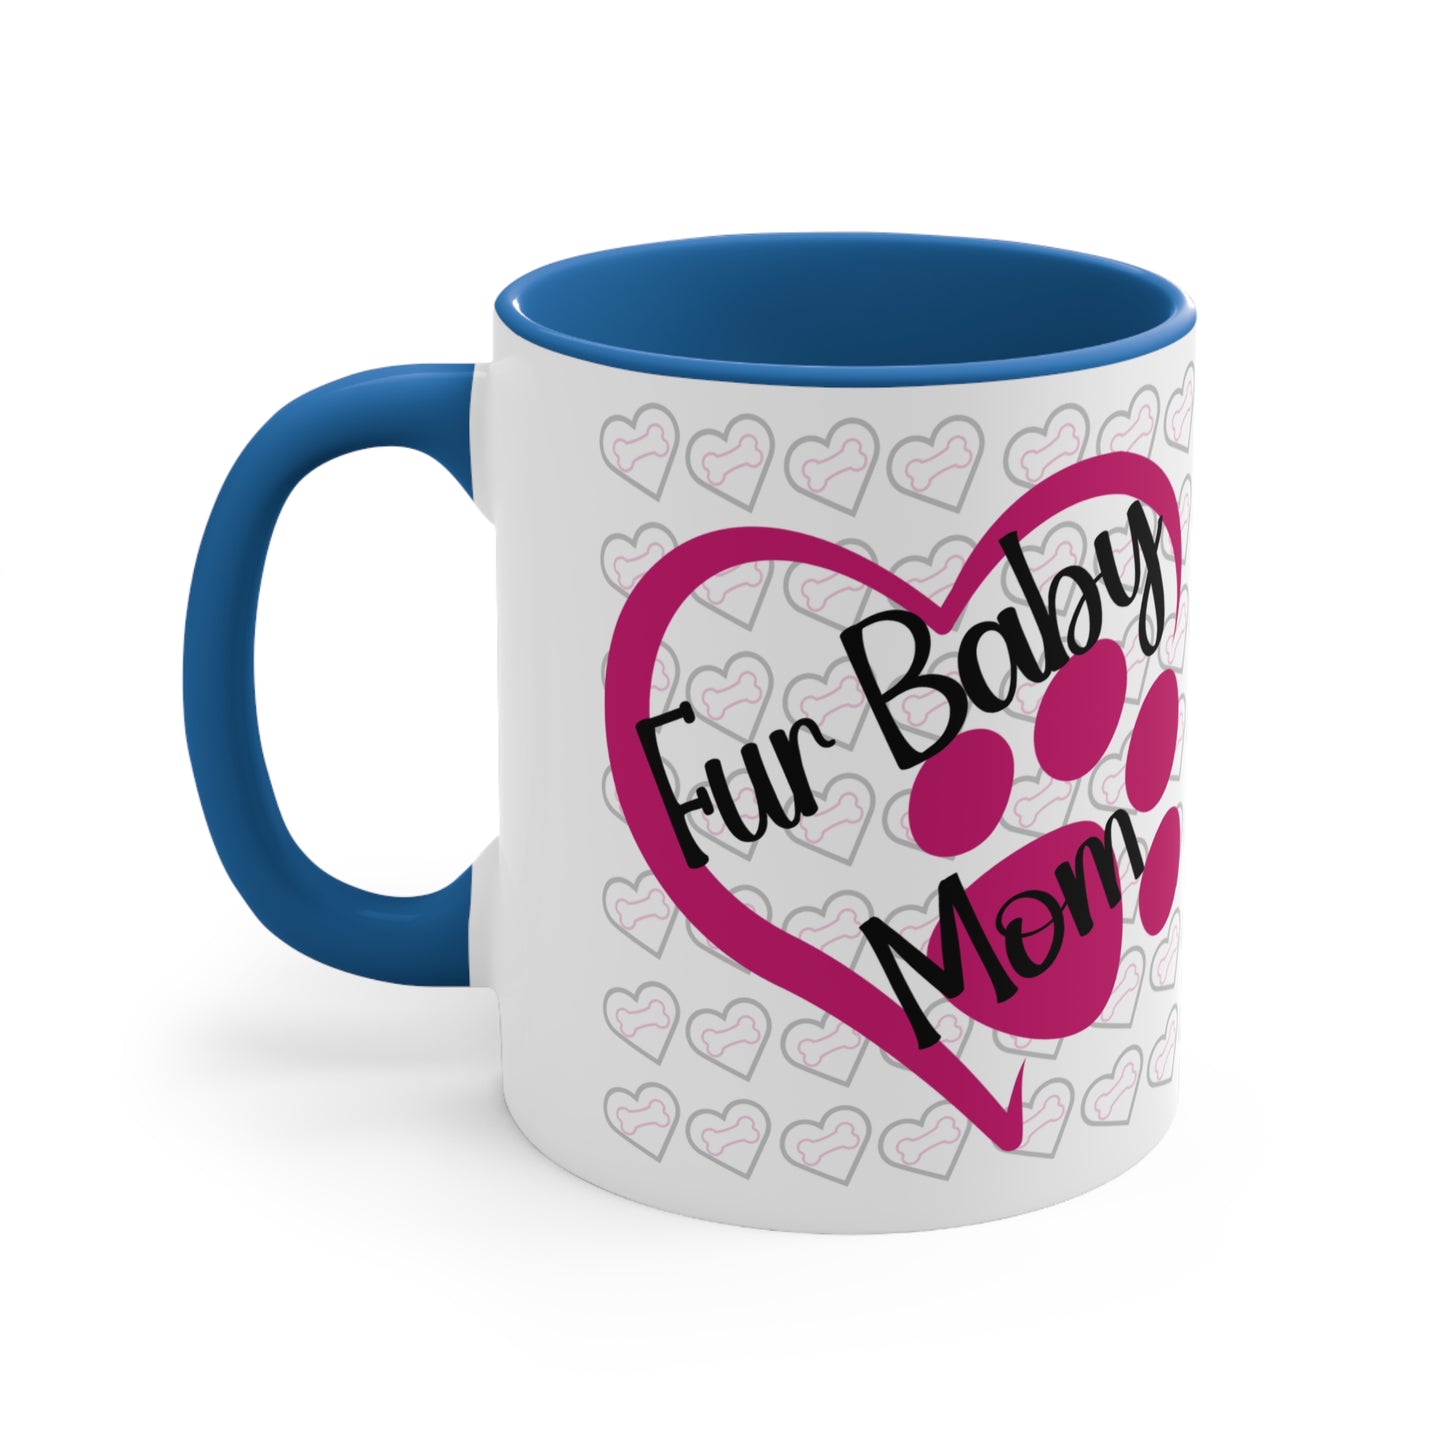 Fur baby mom coffee mug with pink heart and paw print 11 oz, back view in blue.